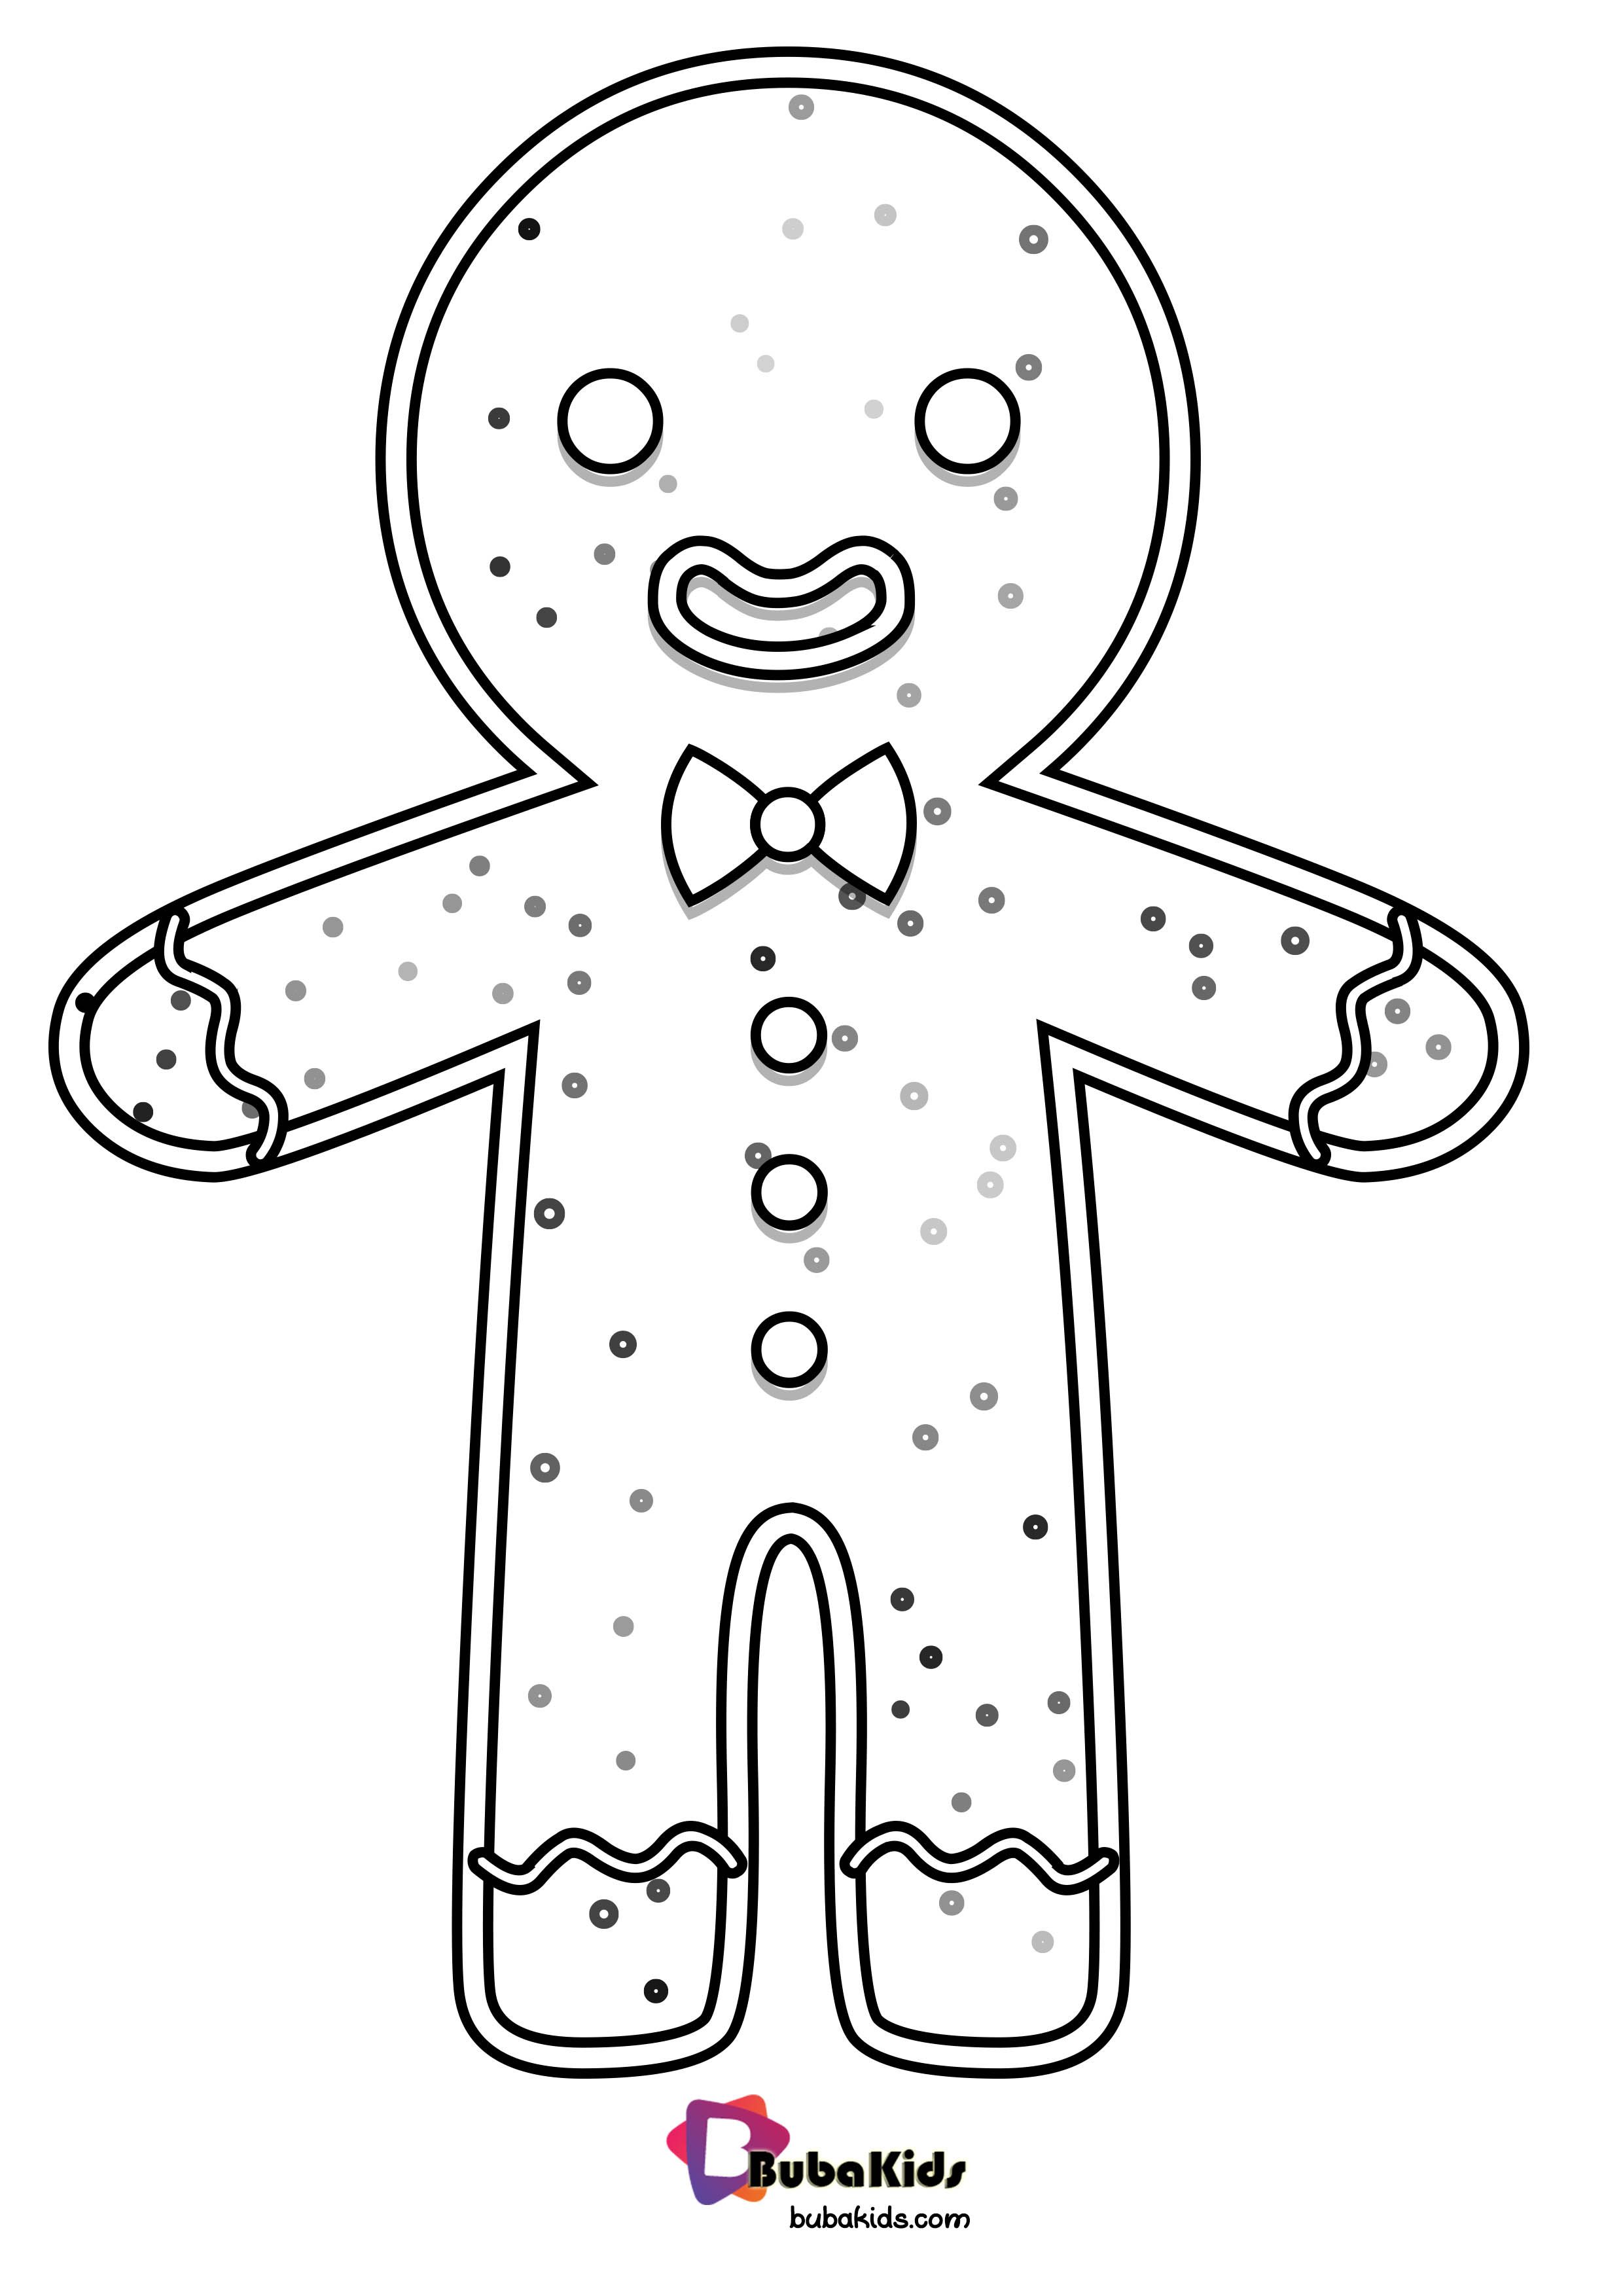 Gingerbread man coloring page collection of cartoon coloring pages for teenage printable tâ gingerbread man coloring page coloring pages cartoon coloring pages